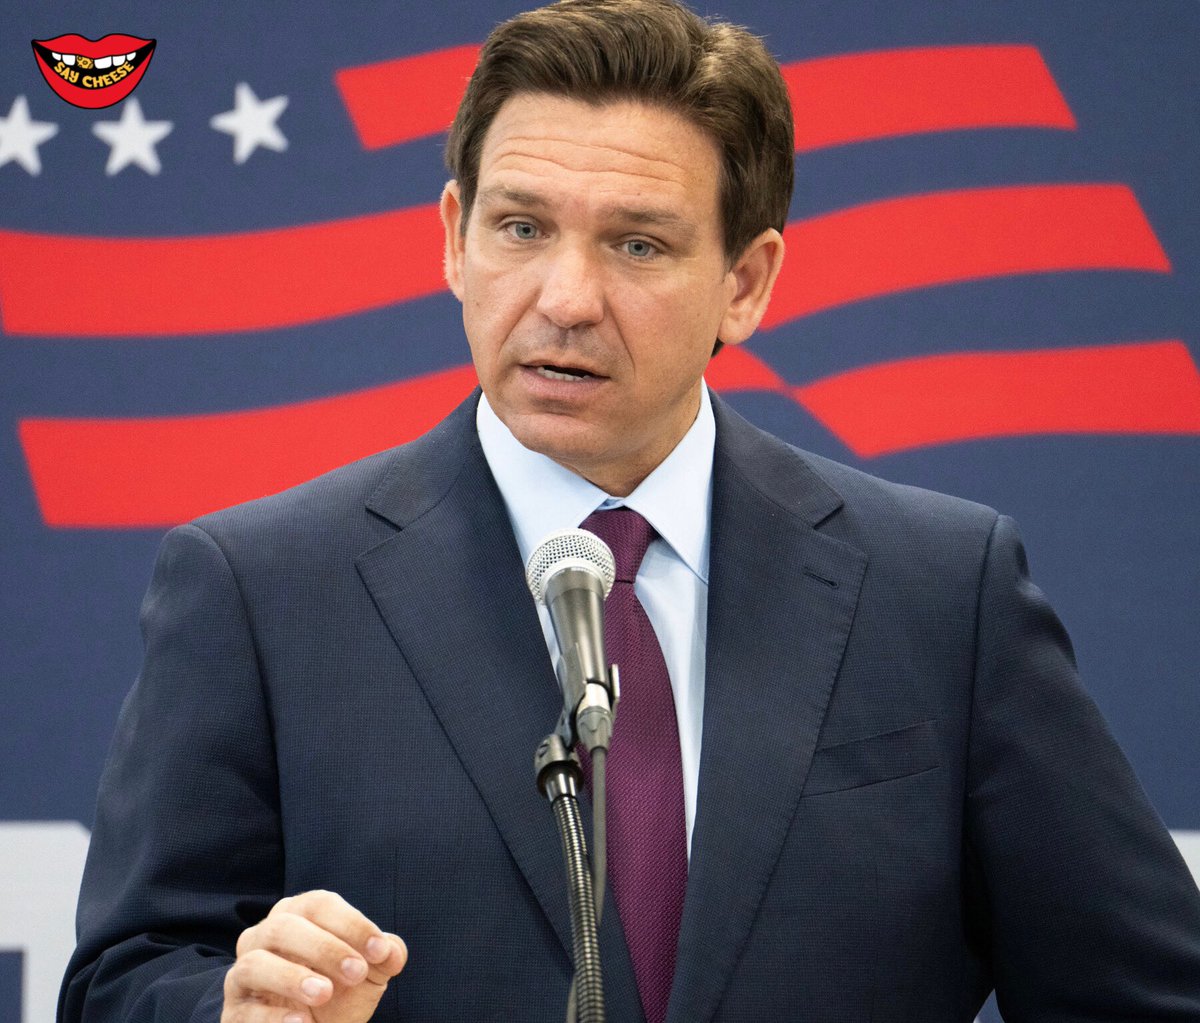 DeSantis on why he wants to keep weed banned in Florida. “This state will start to smell like marijuana and it will ‘reduce the quality of life”